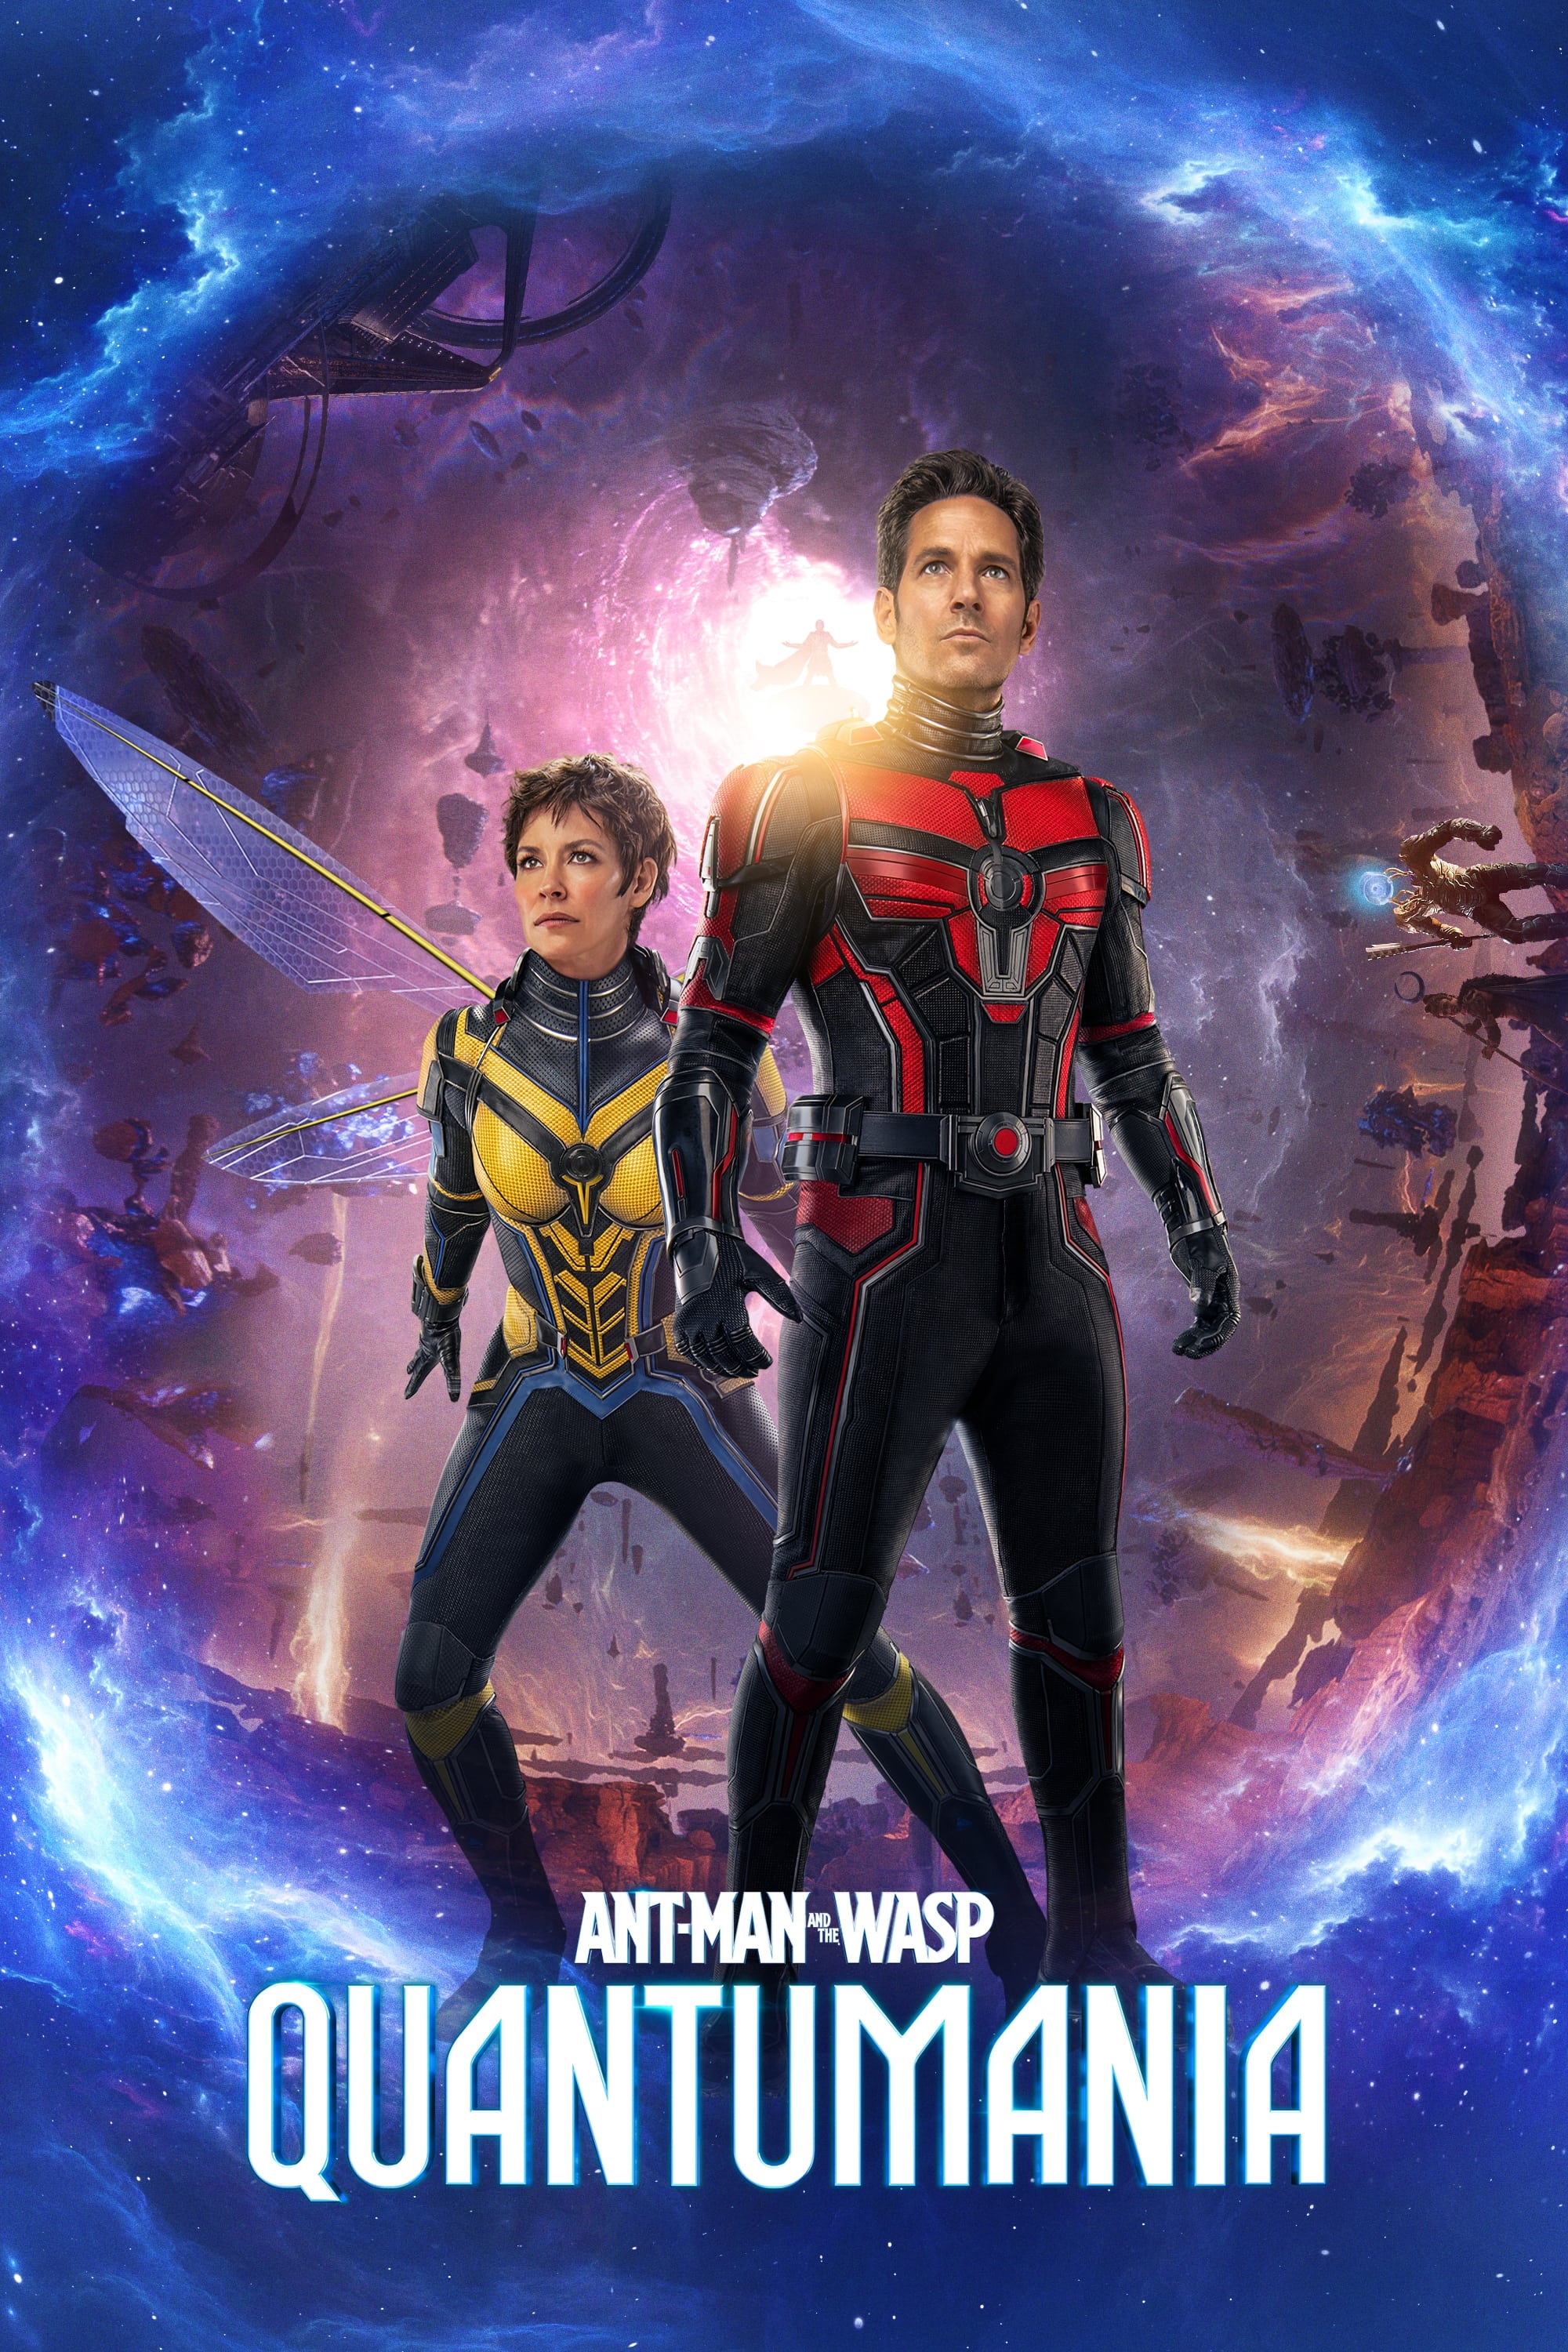 Ant-Man and the Wasp: Quantumania Watch Online